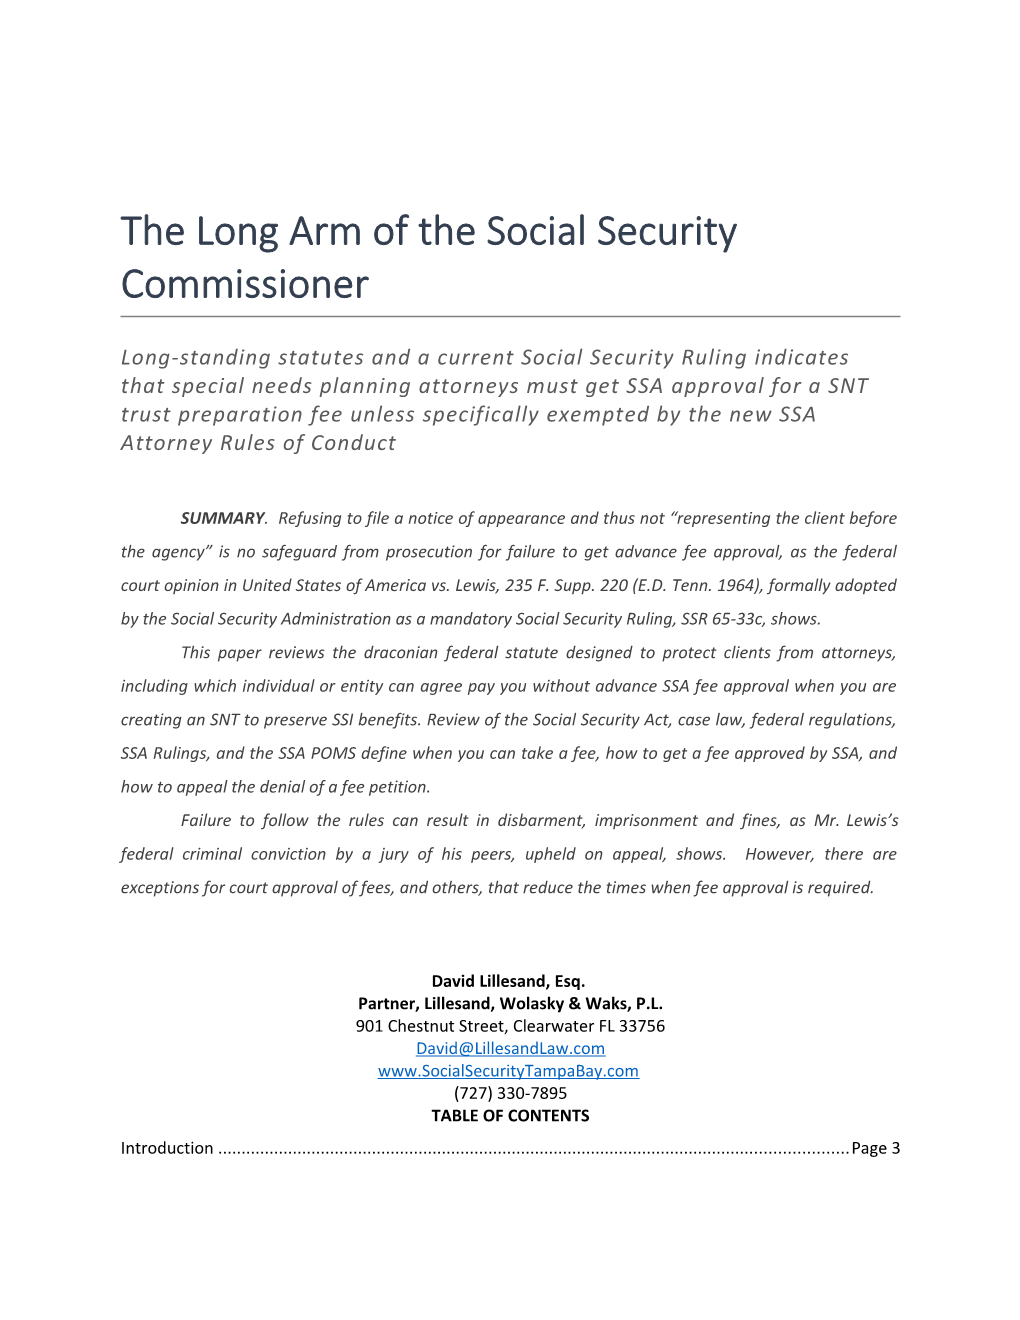 The Long Arm of the Social Security Commissioner